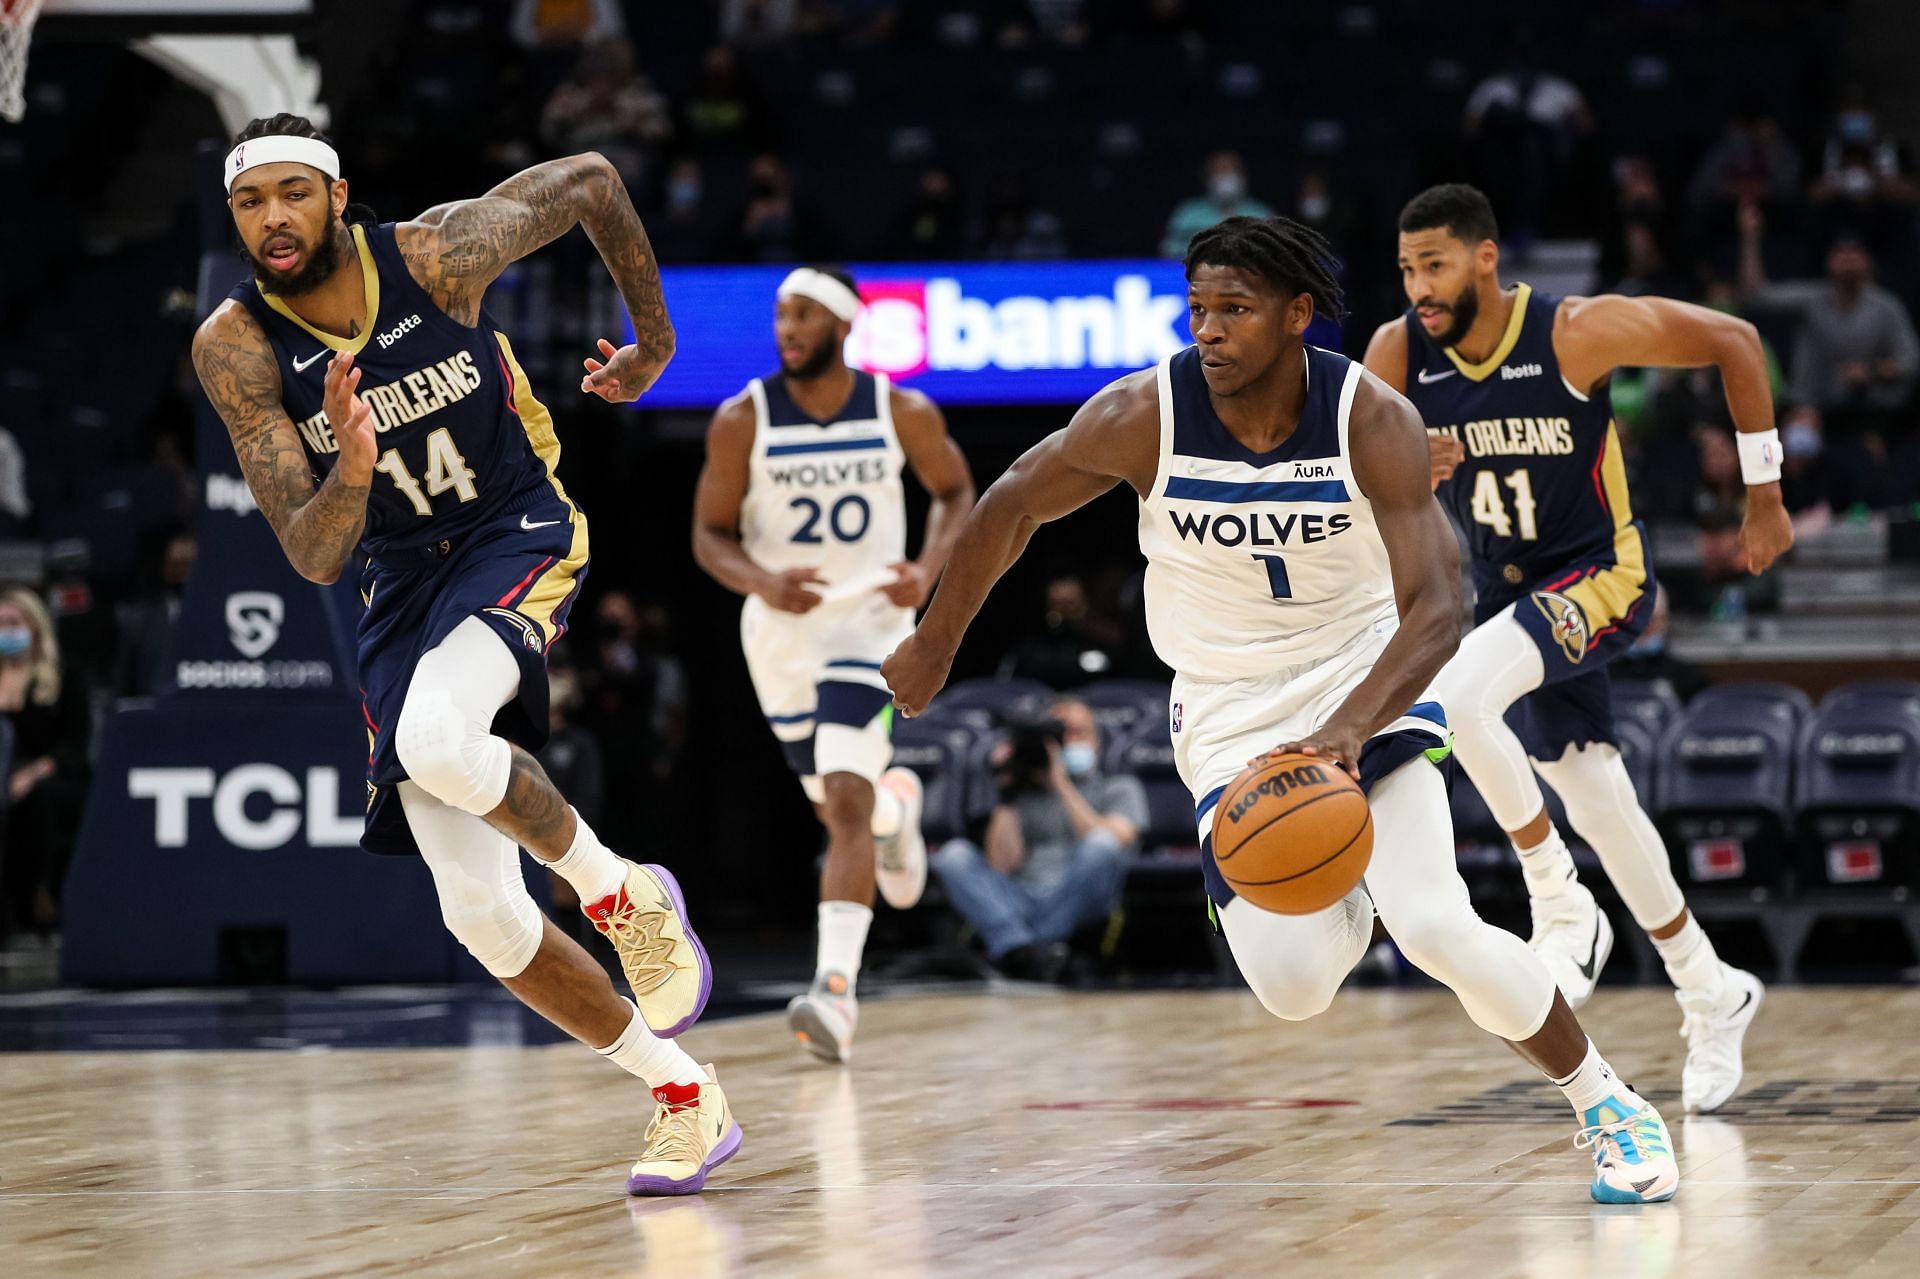 A snap from a game between the New Orleans Pelicans and the Minnesota Timberwolves.